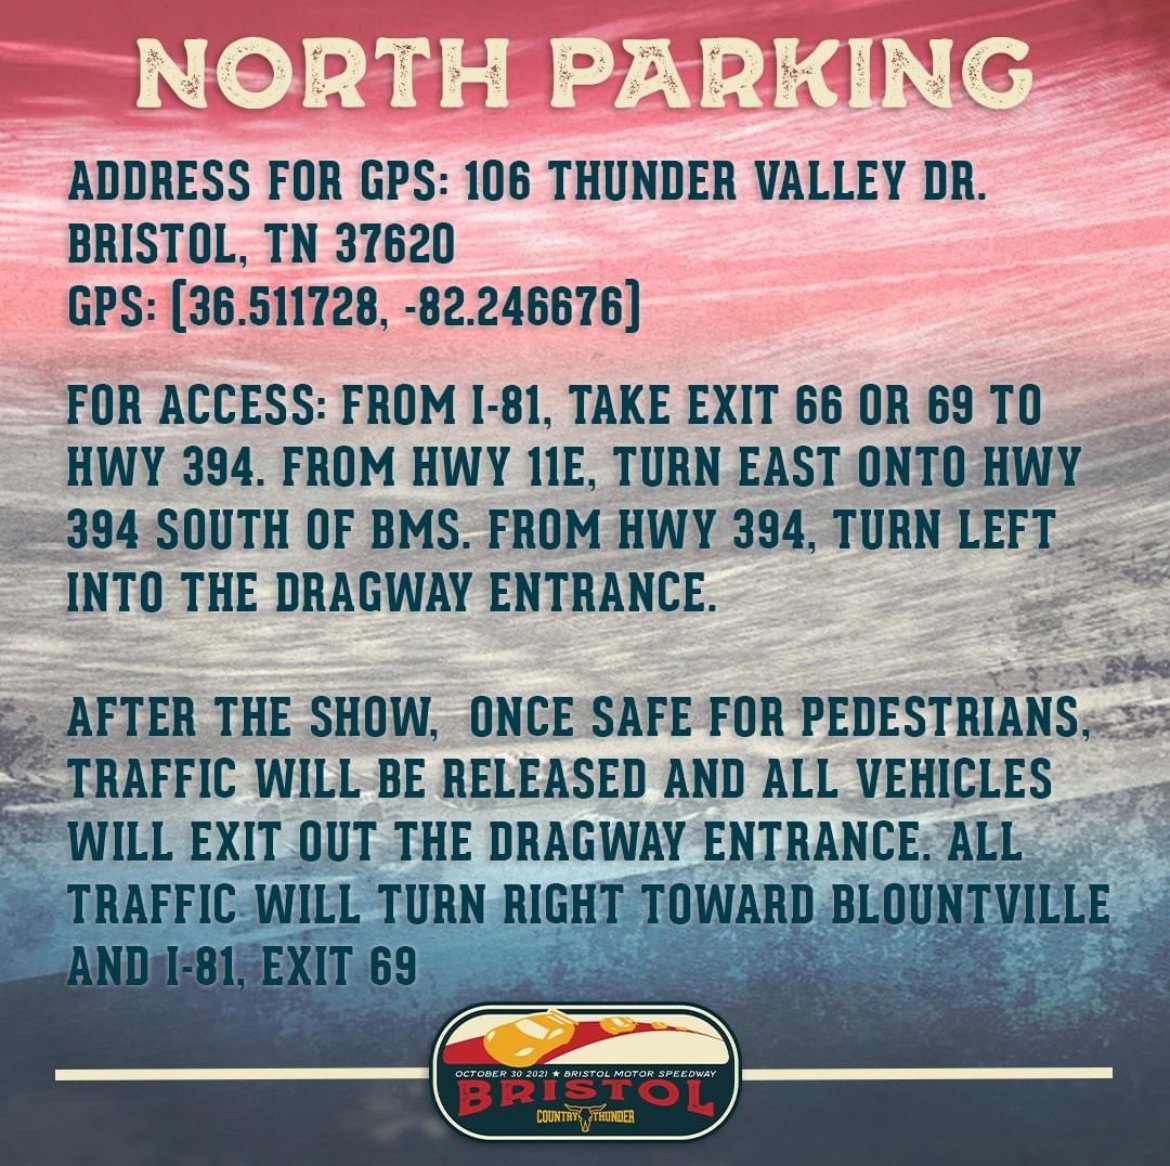 Need address and/or direction on parking lots?  We got you!

If you have not yet purchased parking, we recommend you do so before arriving.

https://t.co/cMCvdxk5sj

#ItsBristolBaby https://t.co/revlX3eL0W